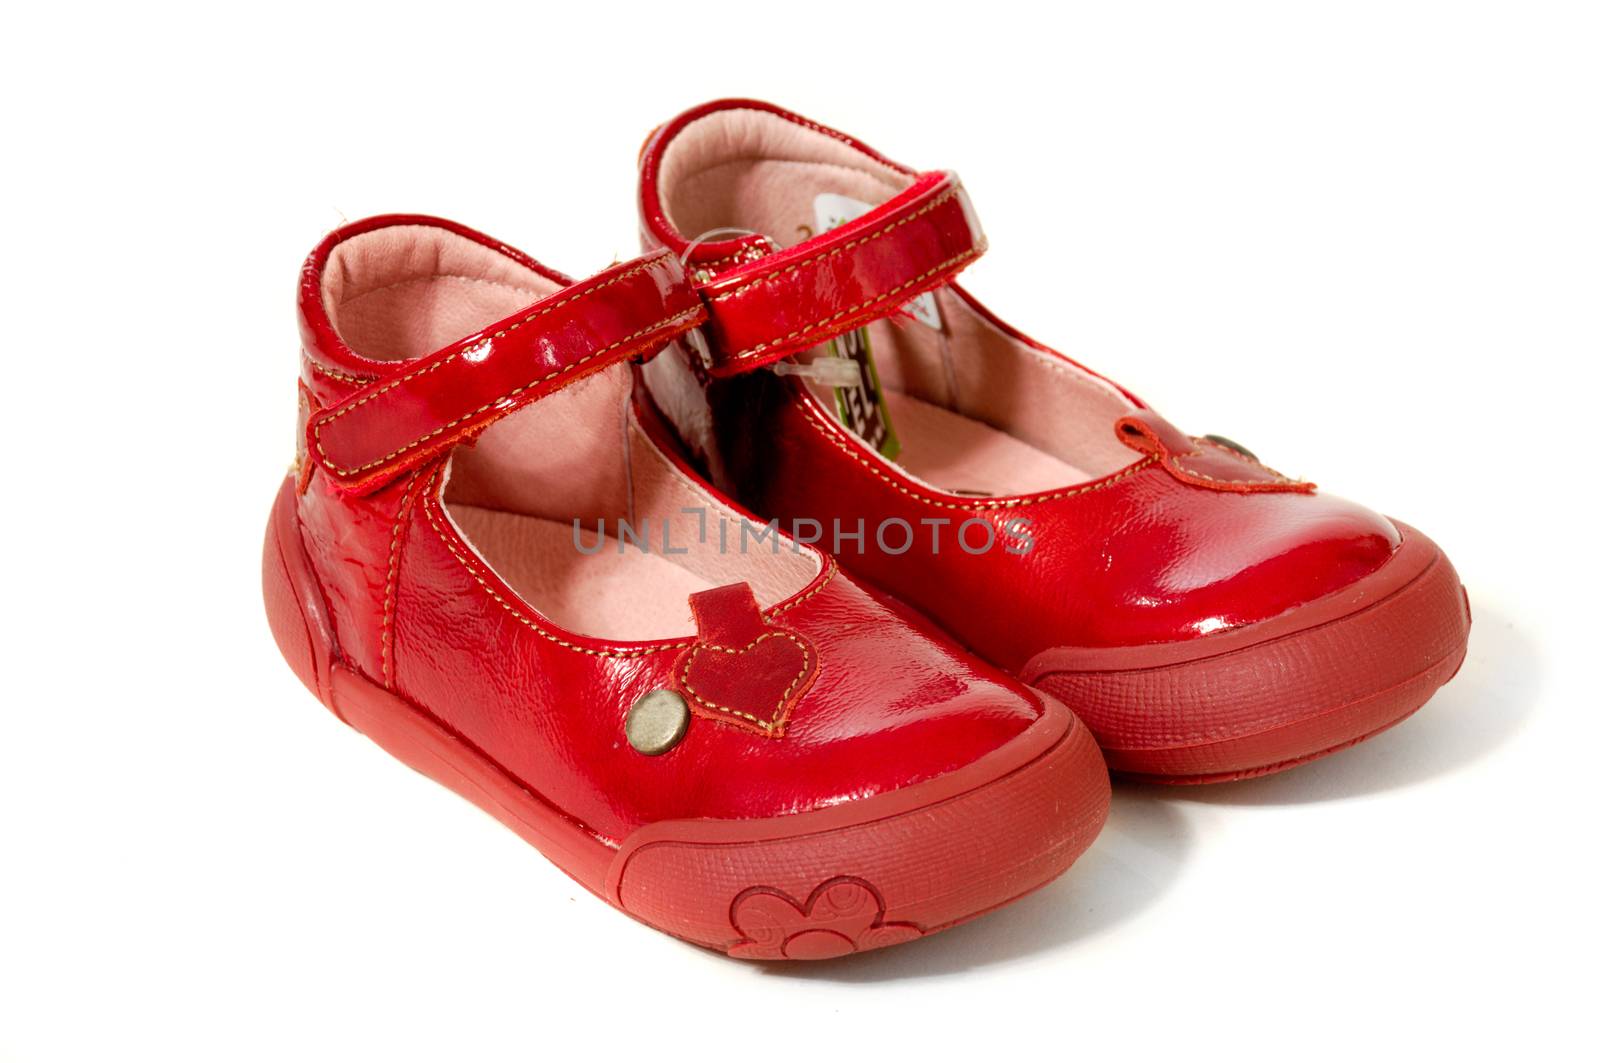 Pair of red shoes by cfoto